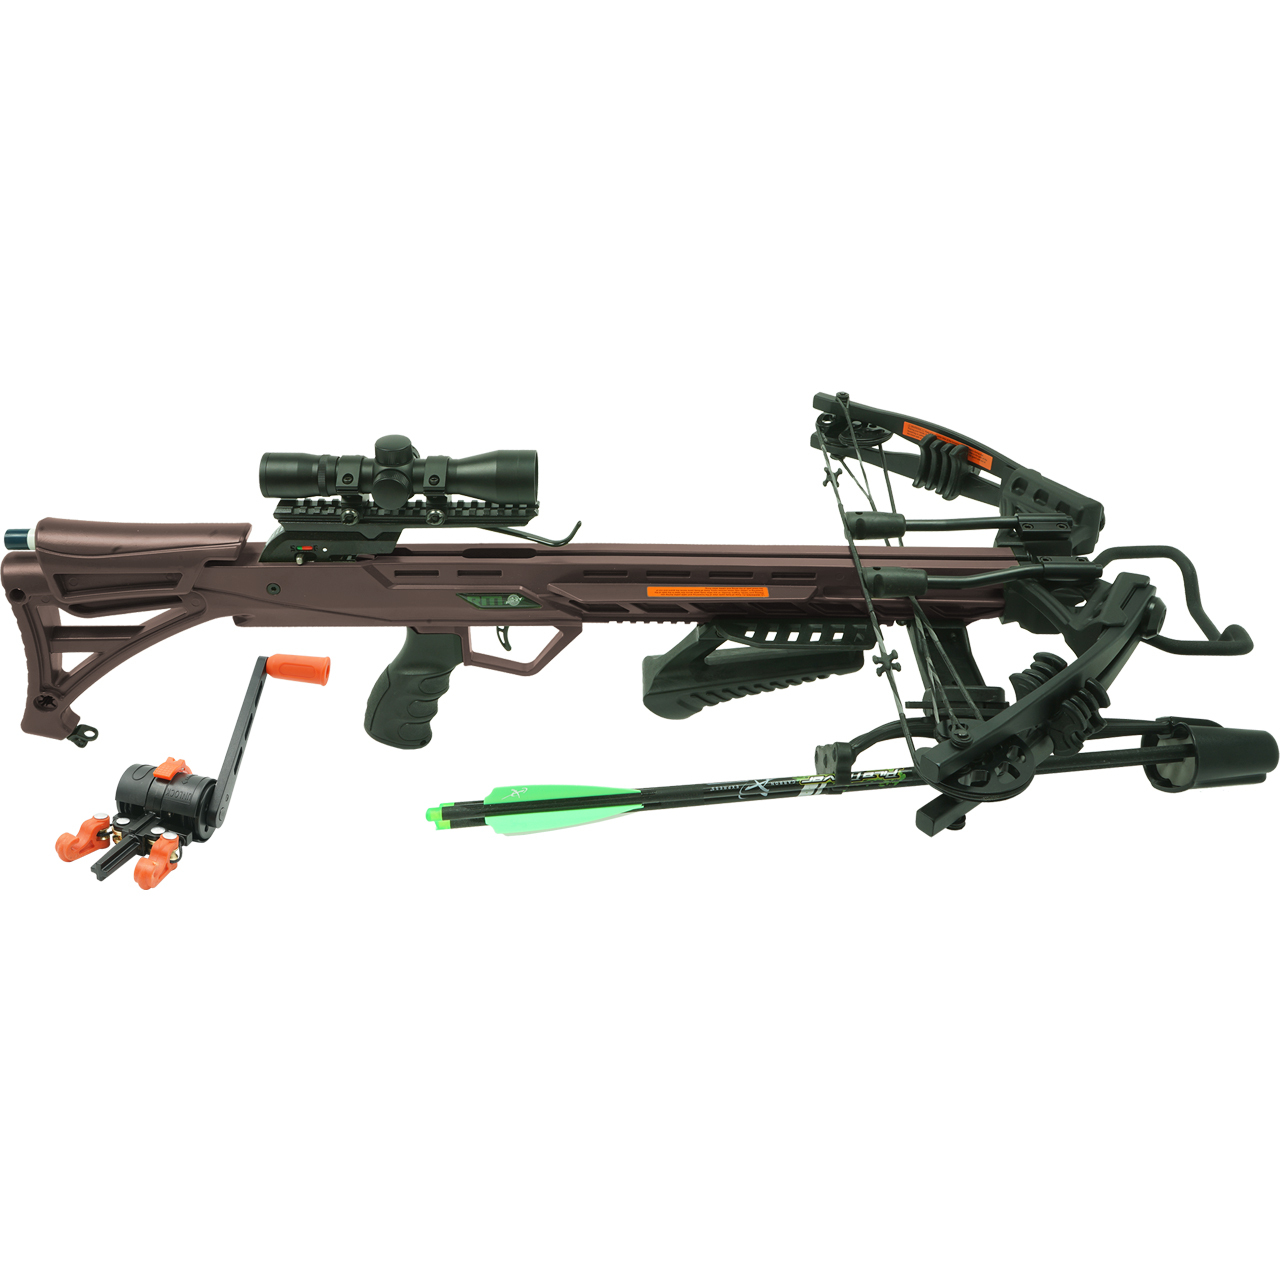 Rocky Mountain 415 Crossbow with Crank. Dark Earth Color. - image 1 of 5